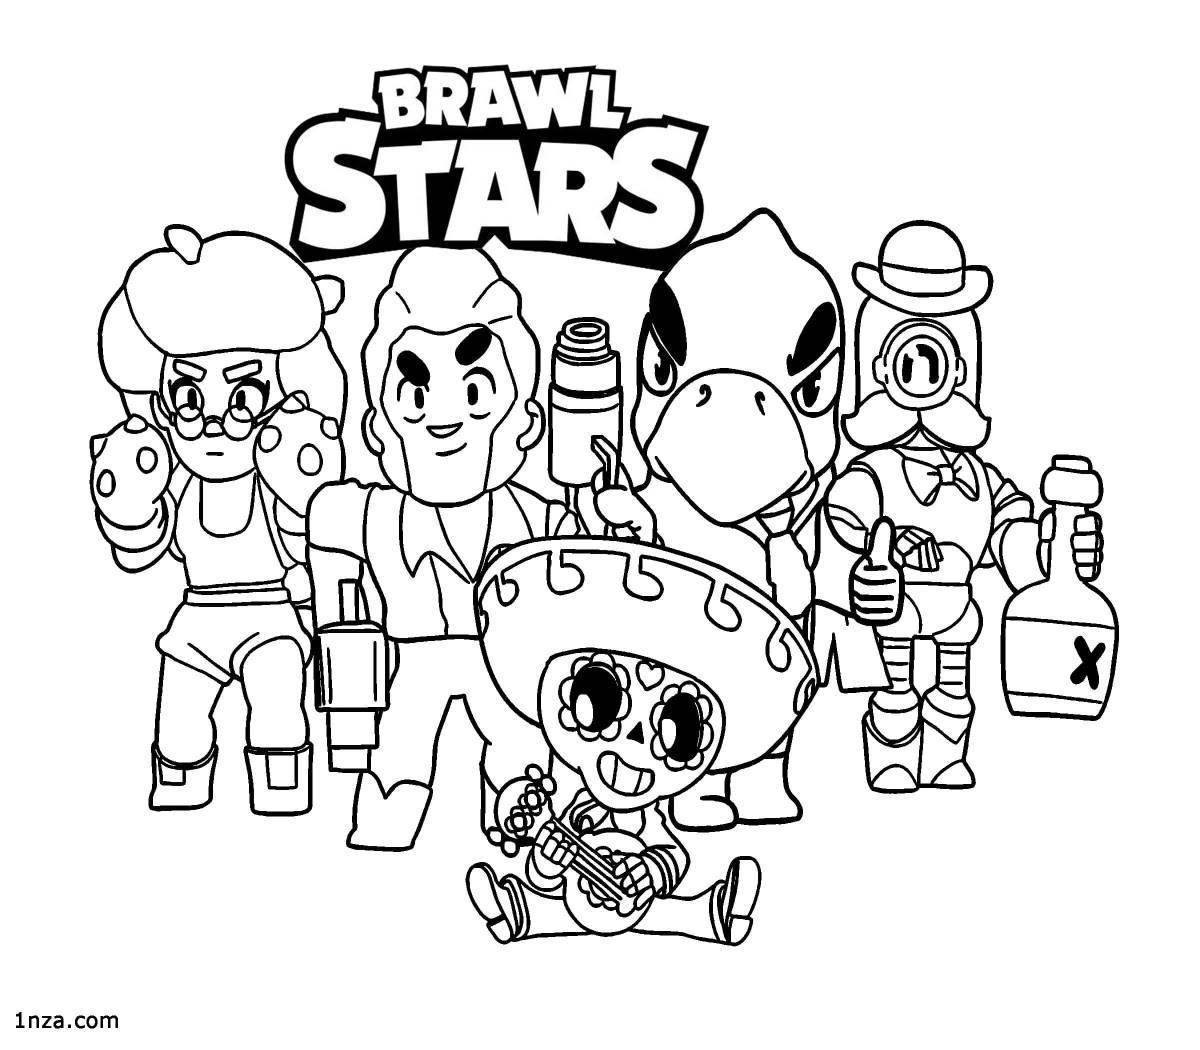 Belle bravo stars blossom coloring page